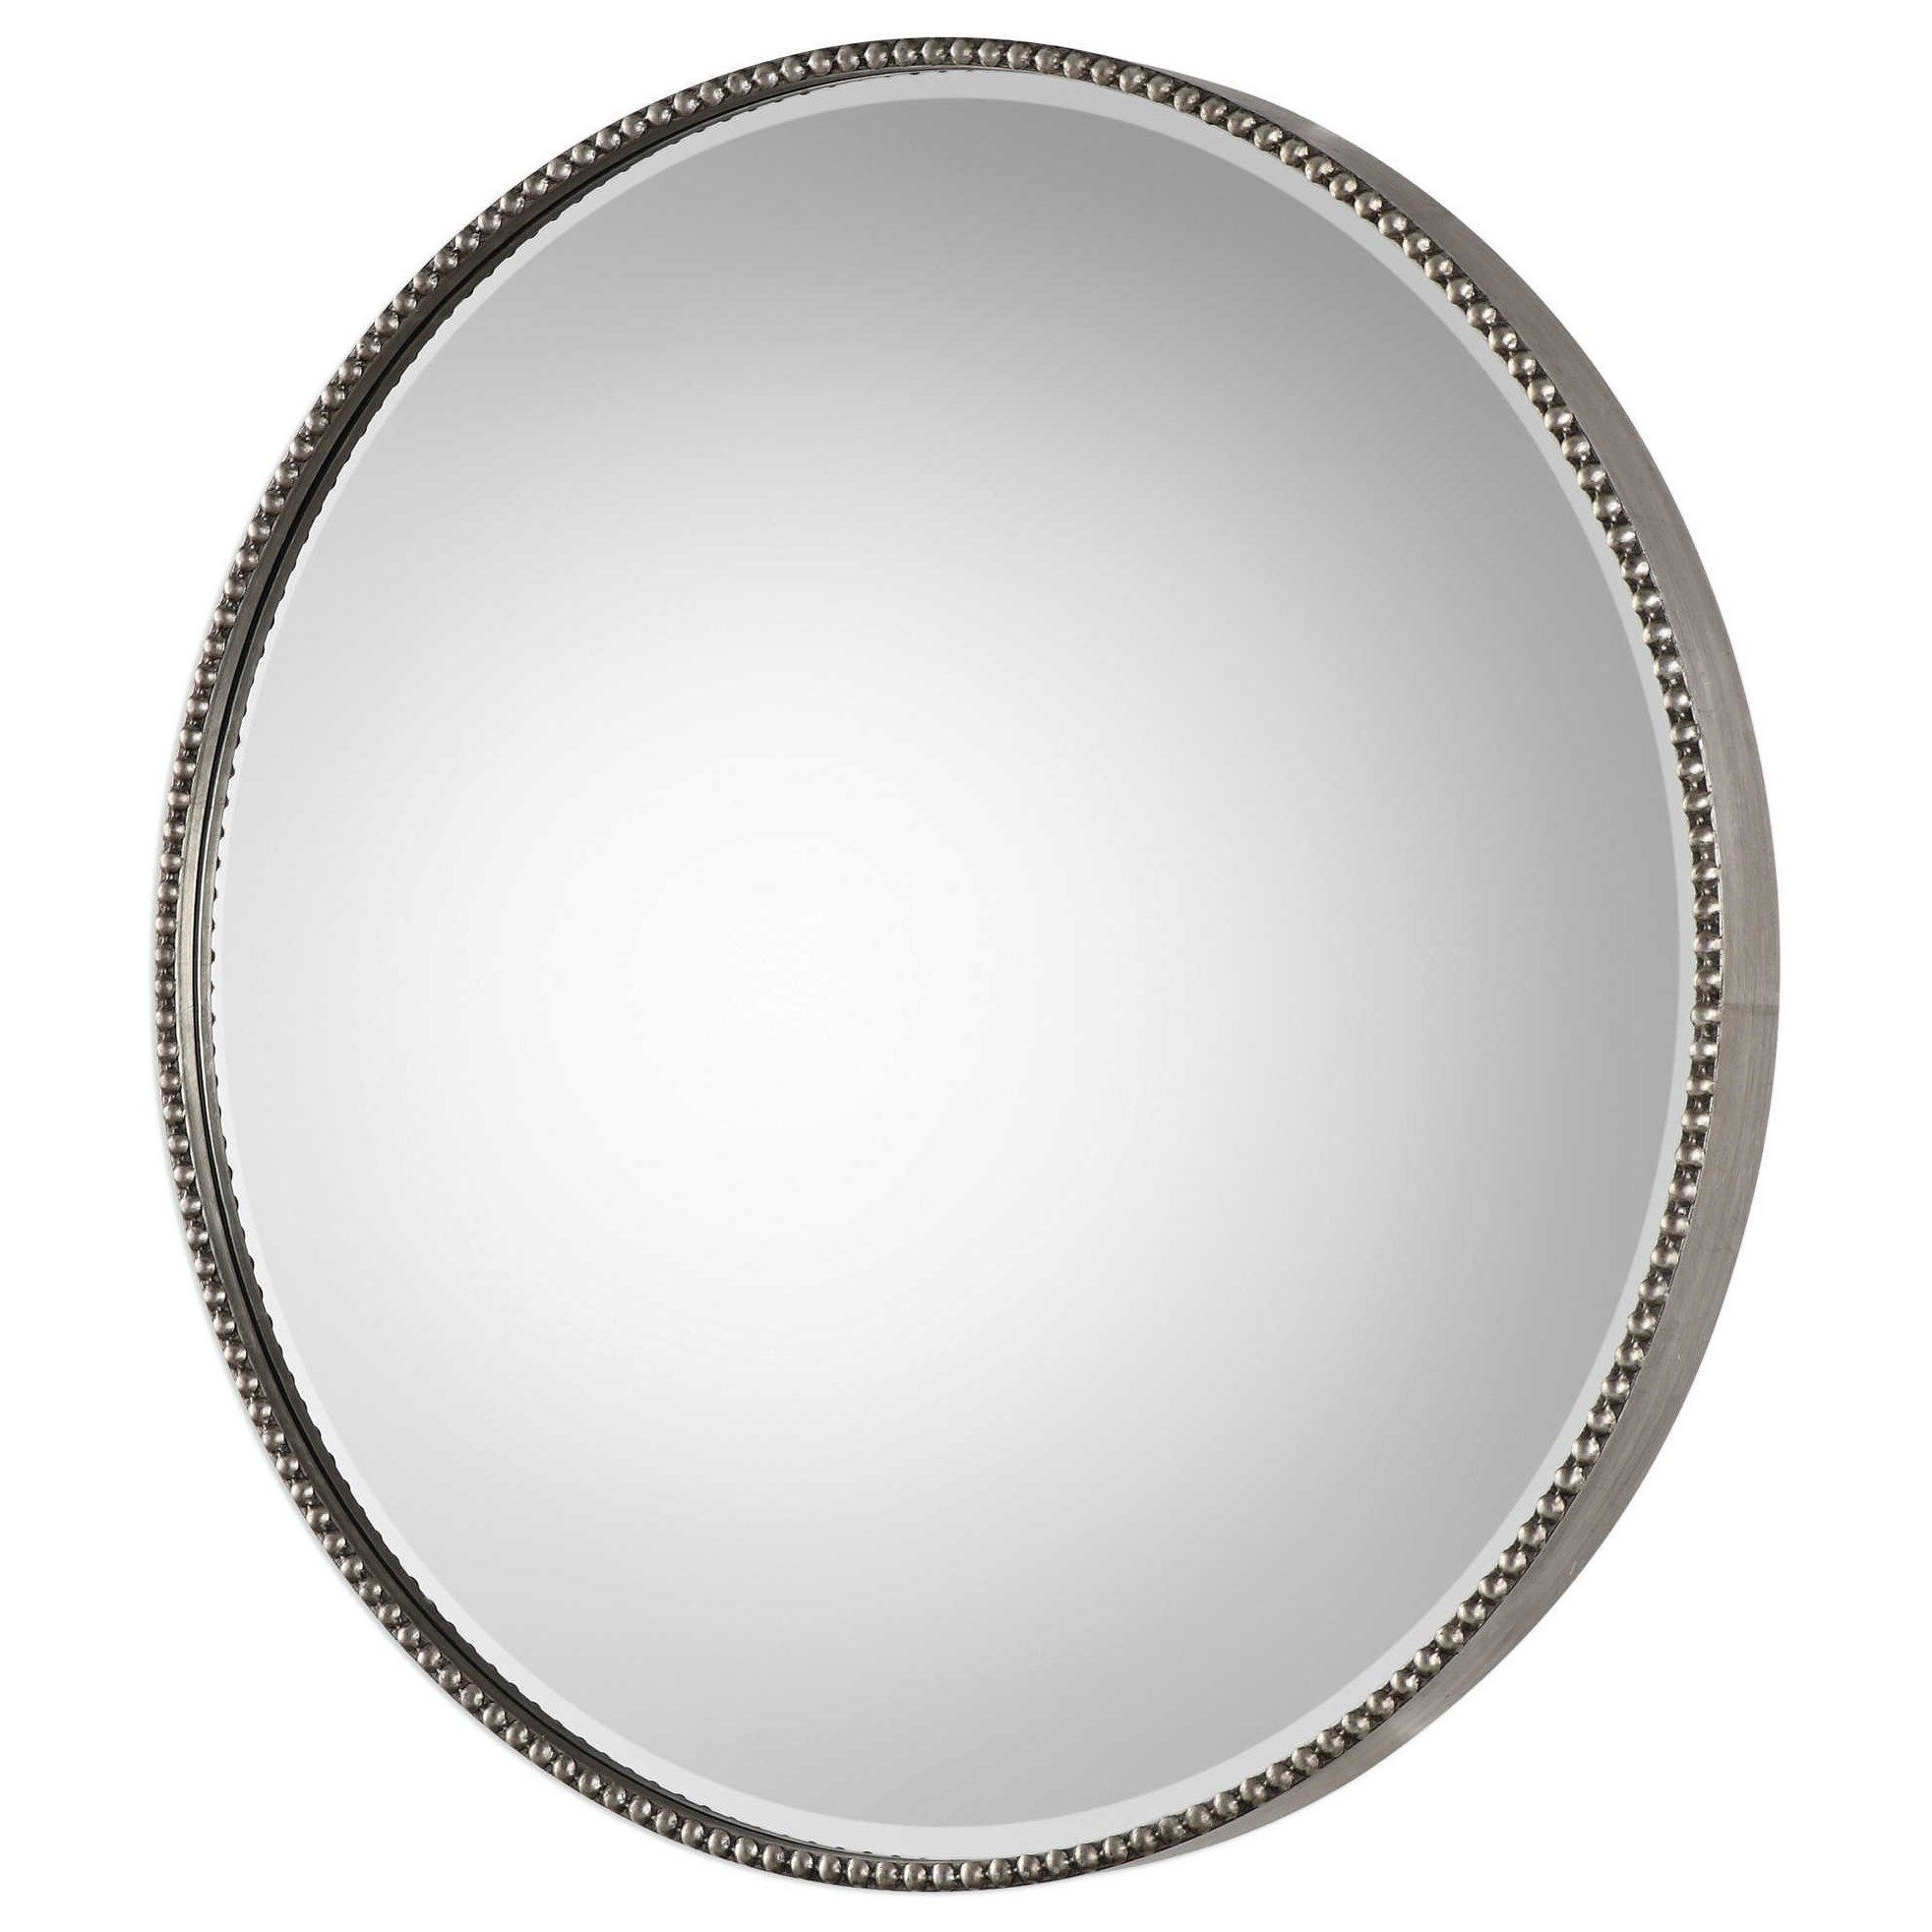 Uttermost Mirrors 09252 Stefania Beaded Round Mirror | Del Sol Pertaining To Round Beaded Trim Wall Mirrors (View 1 of 15)